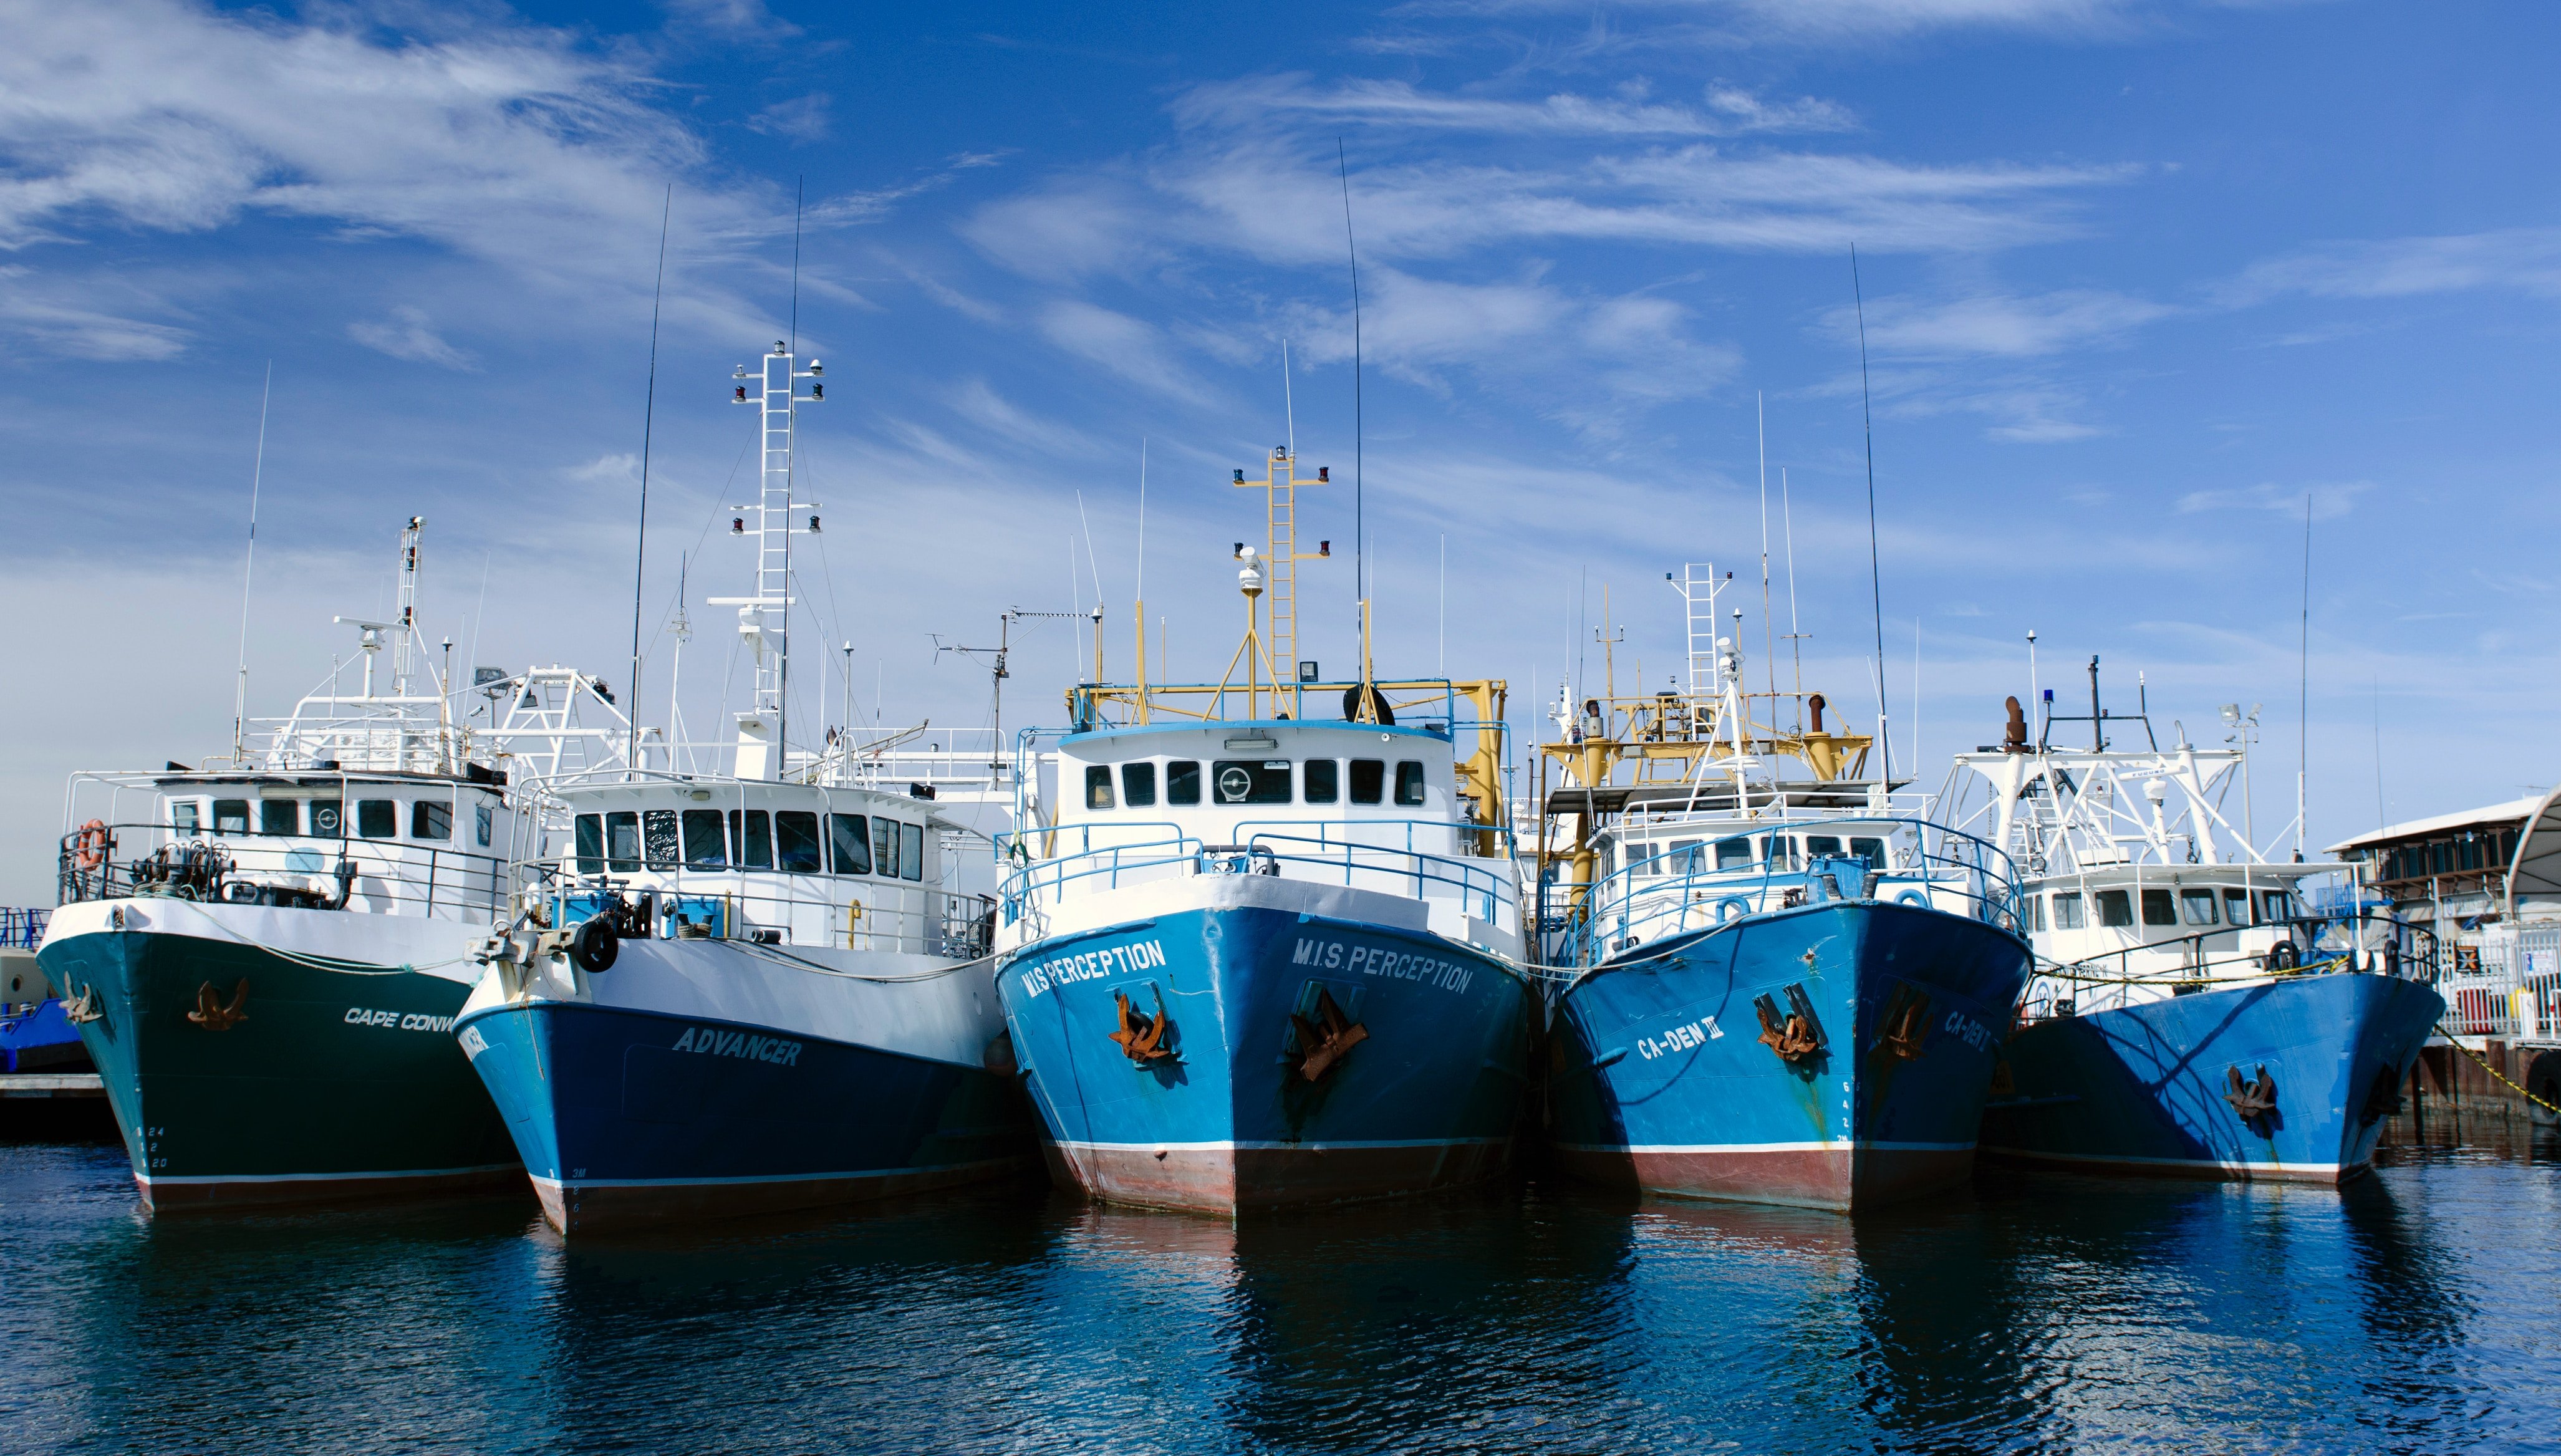 Five fishing boats lined up